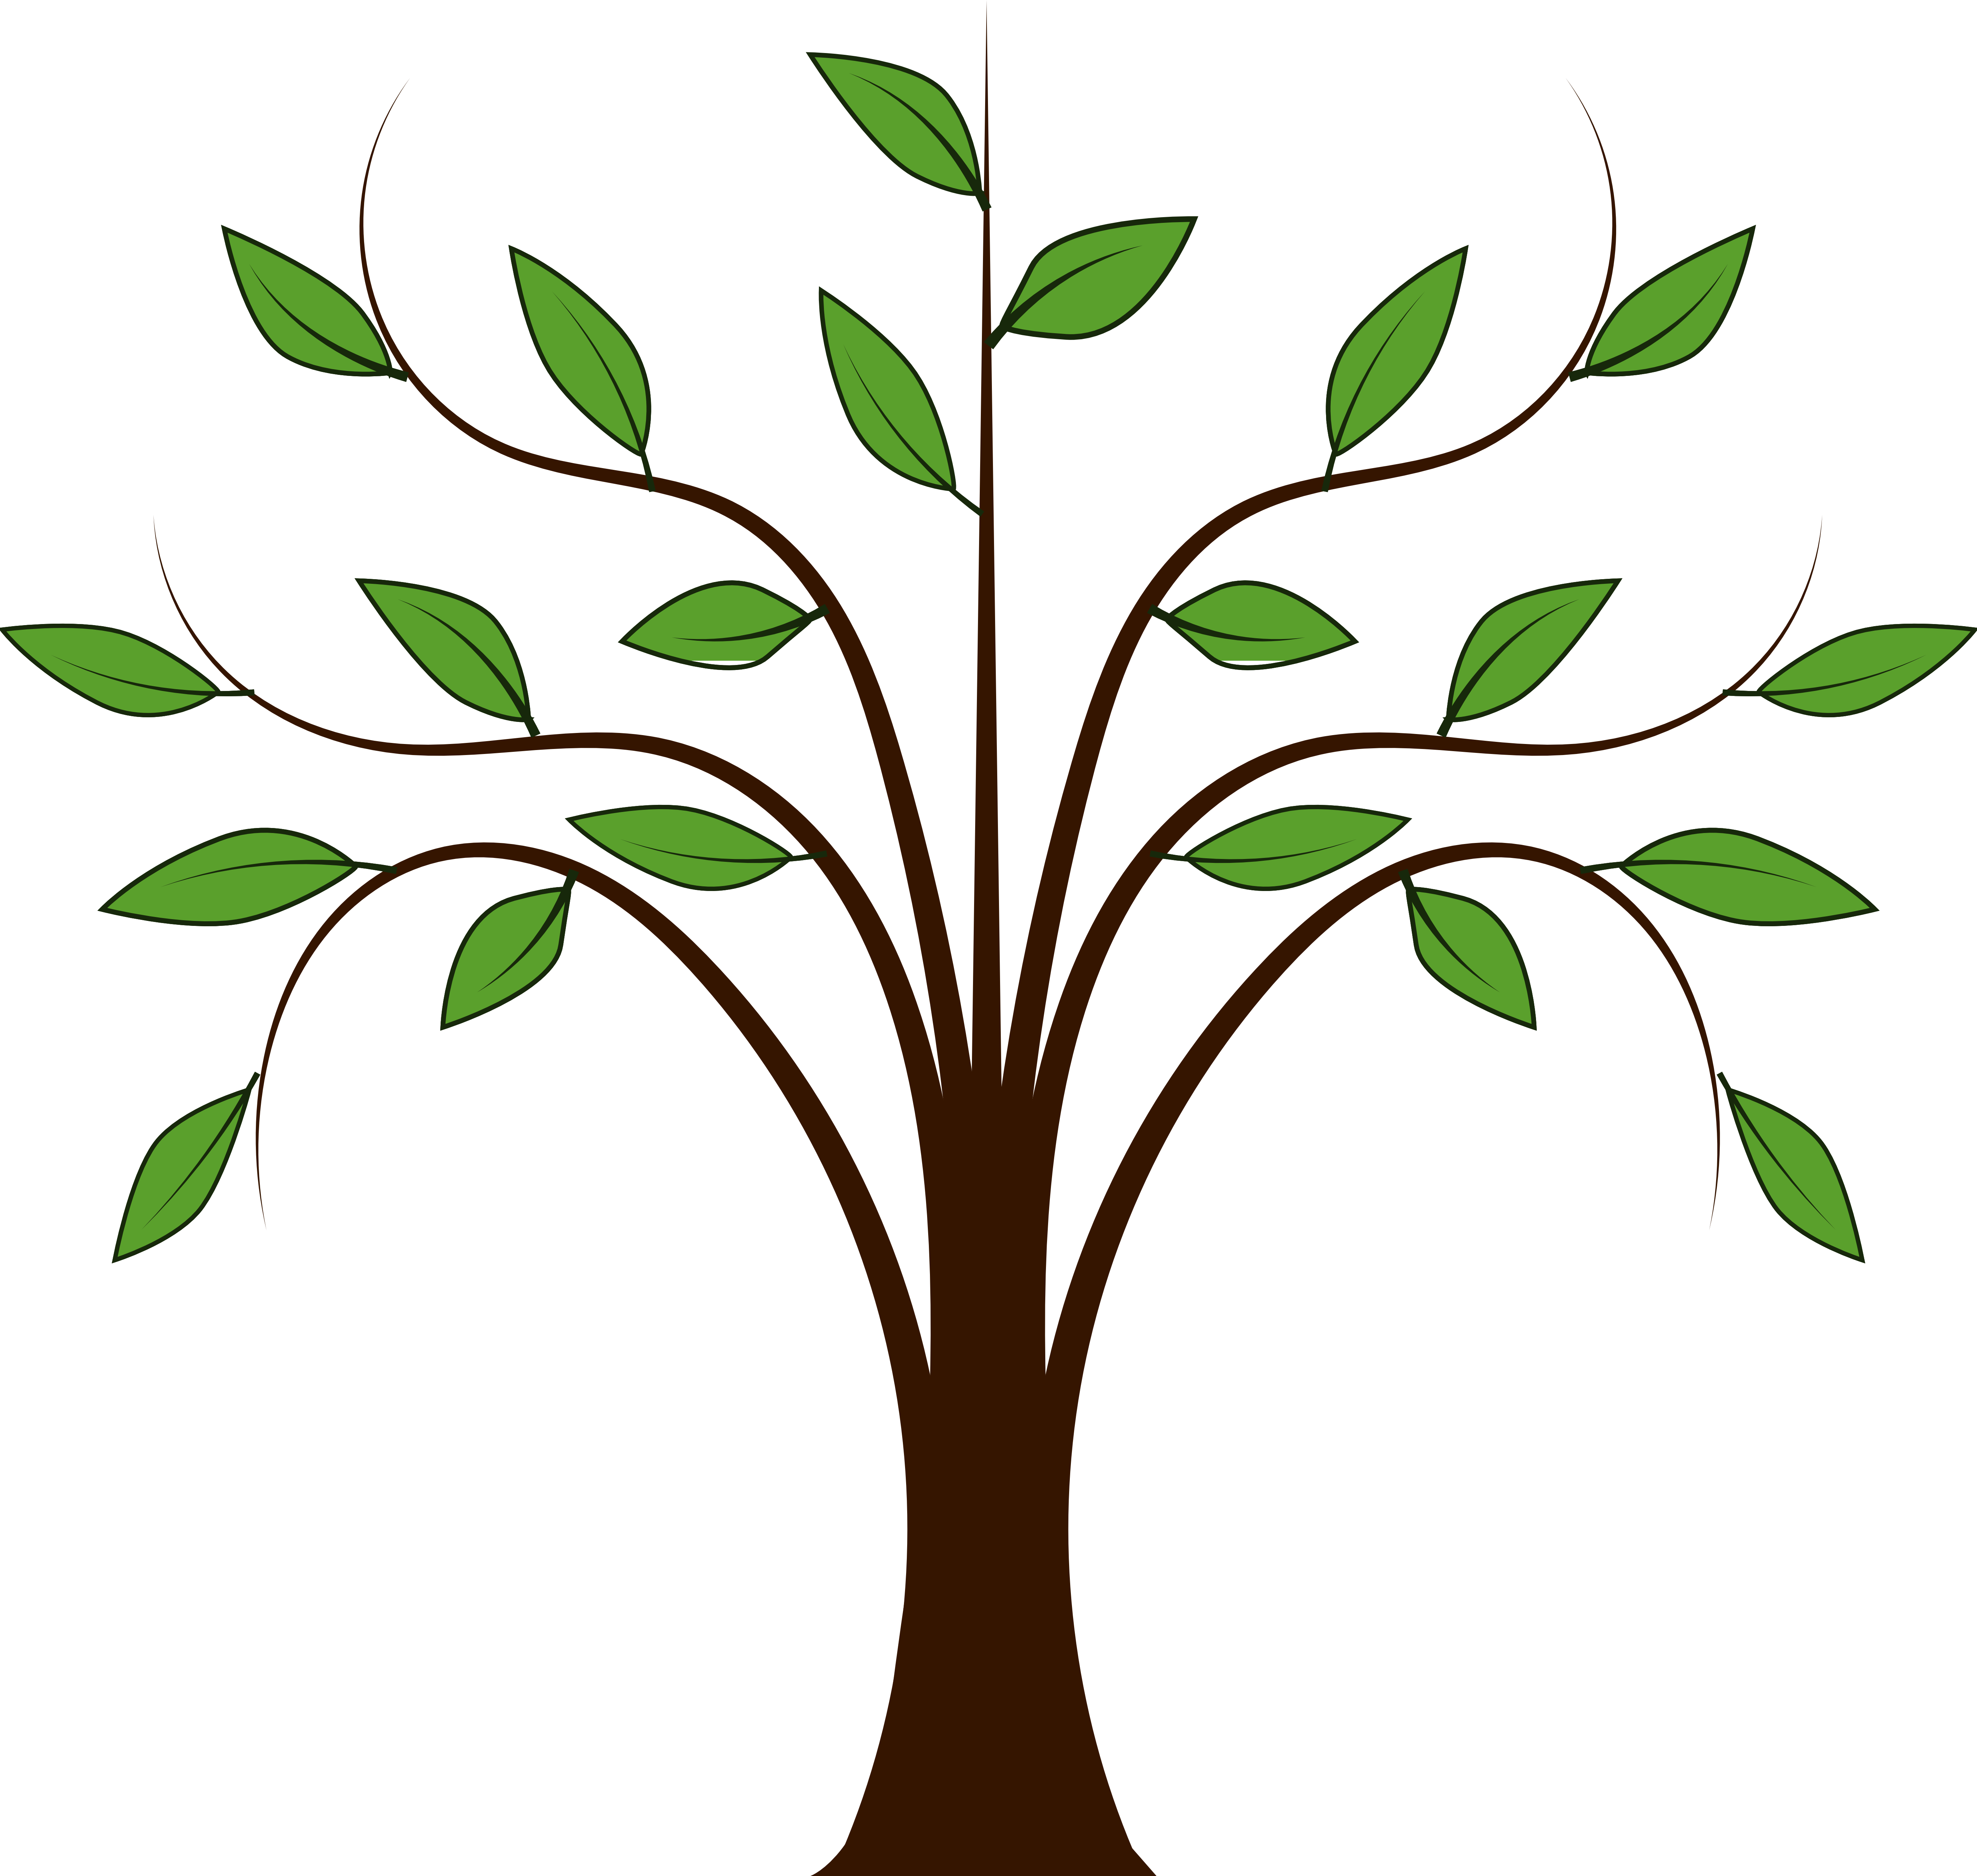 Trees backround clipart outline